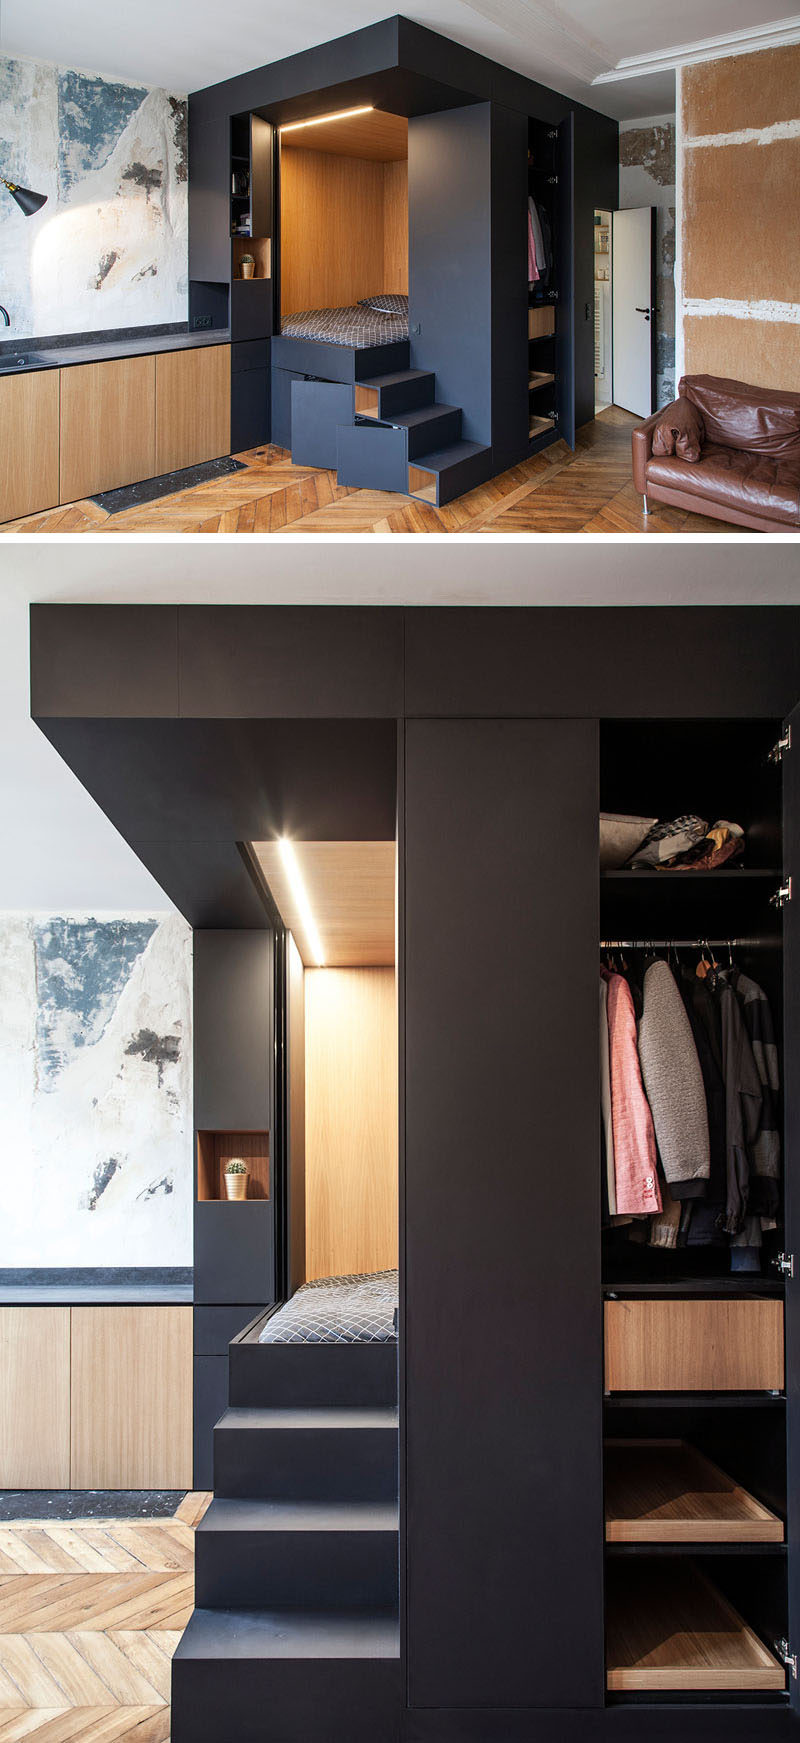 Interior design firm Batiik Studio, have transformed a run down Parisian apartment into to a functional space with a custom built lofted bed unit. #InteriorDesign #LoftBed #SmallApartment #Storage